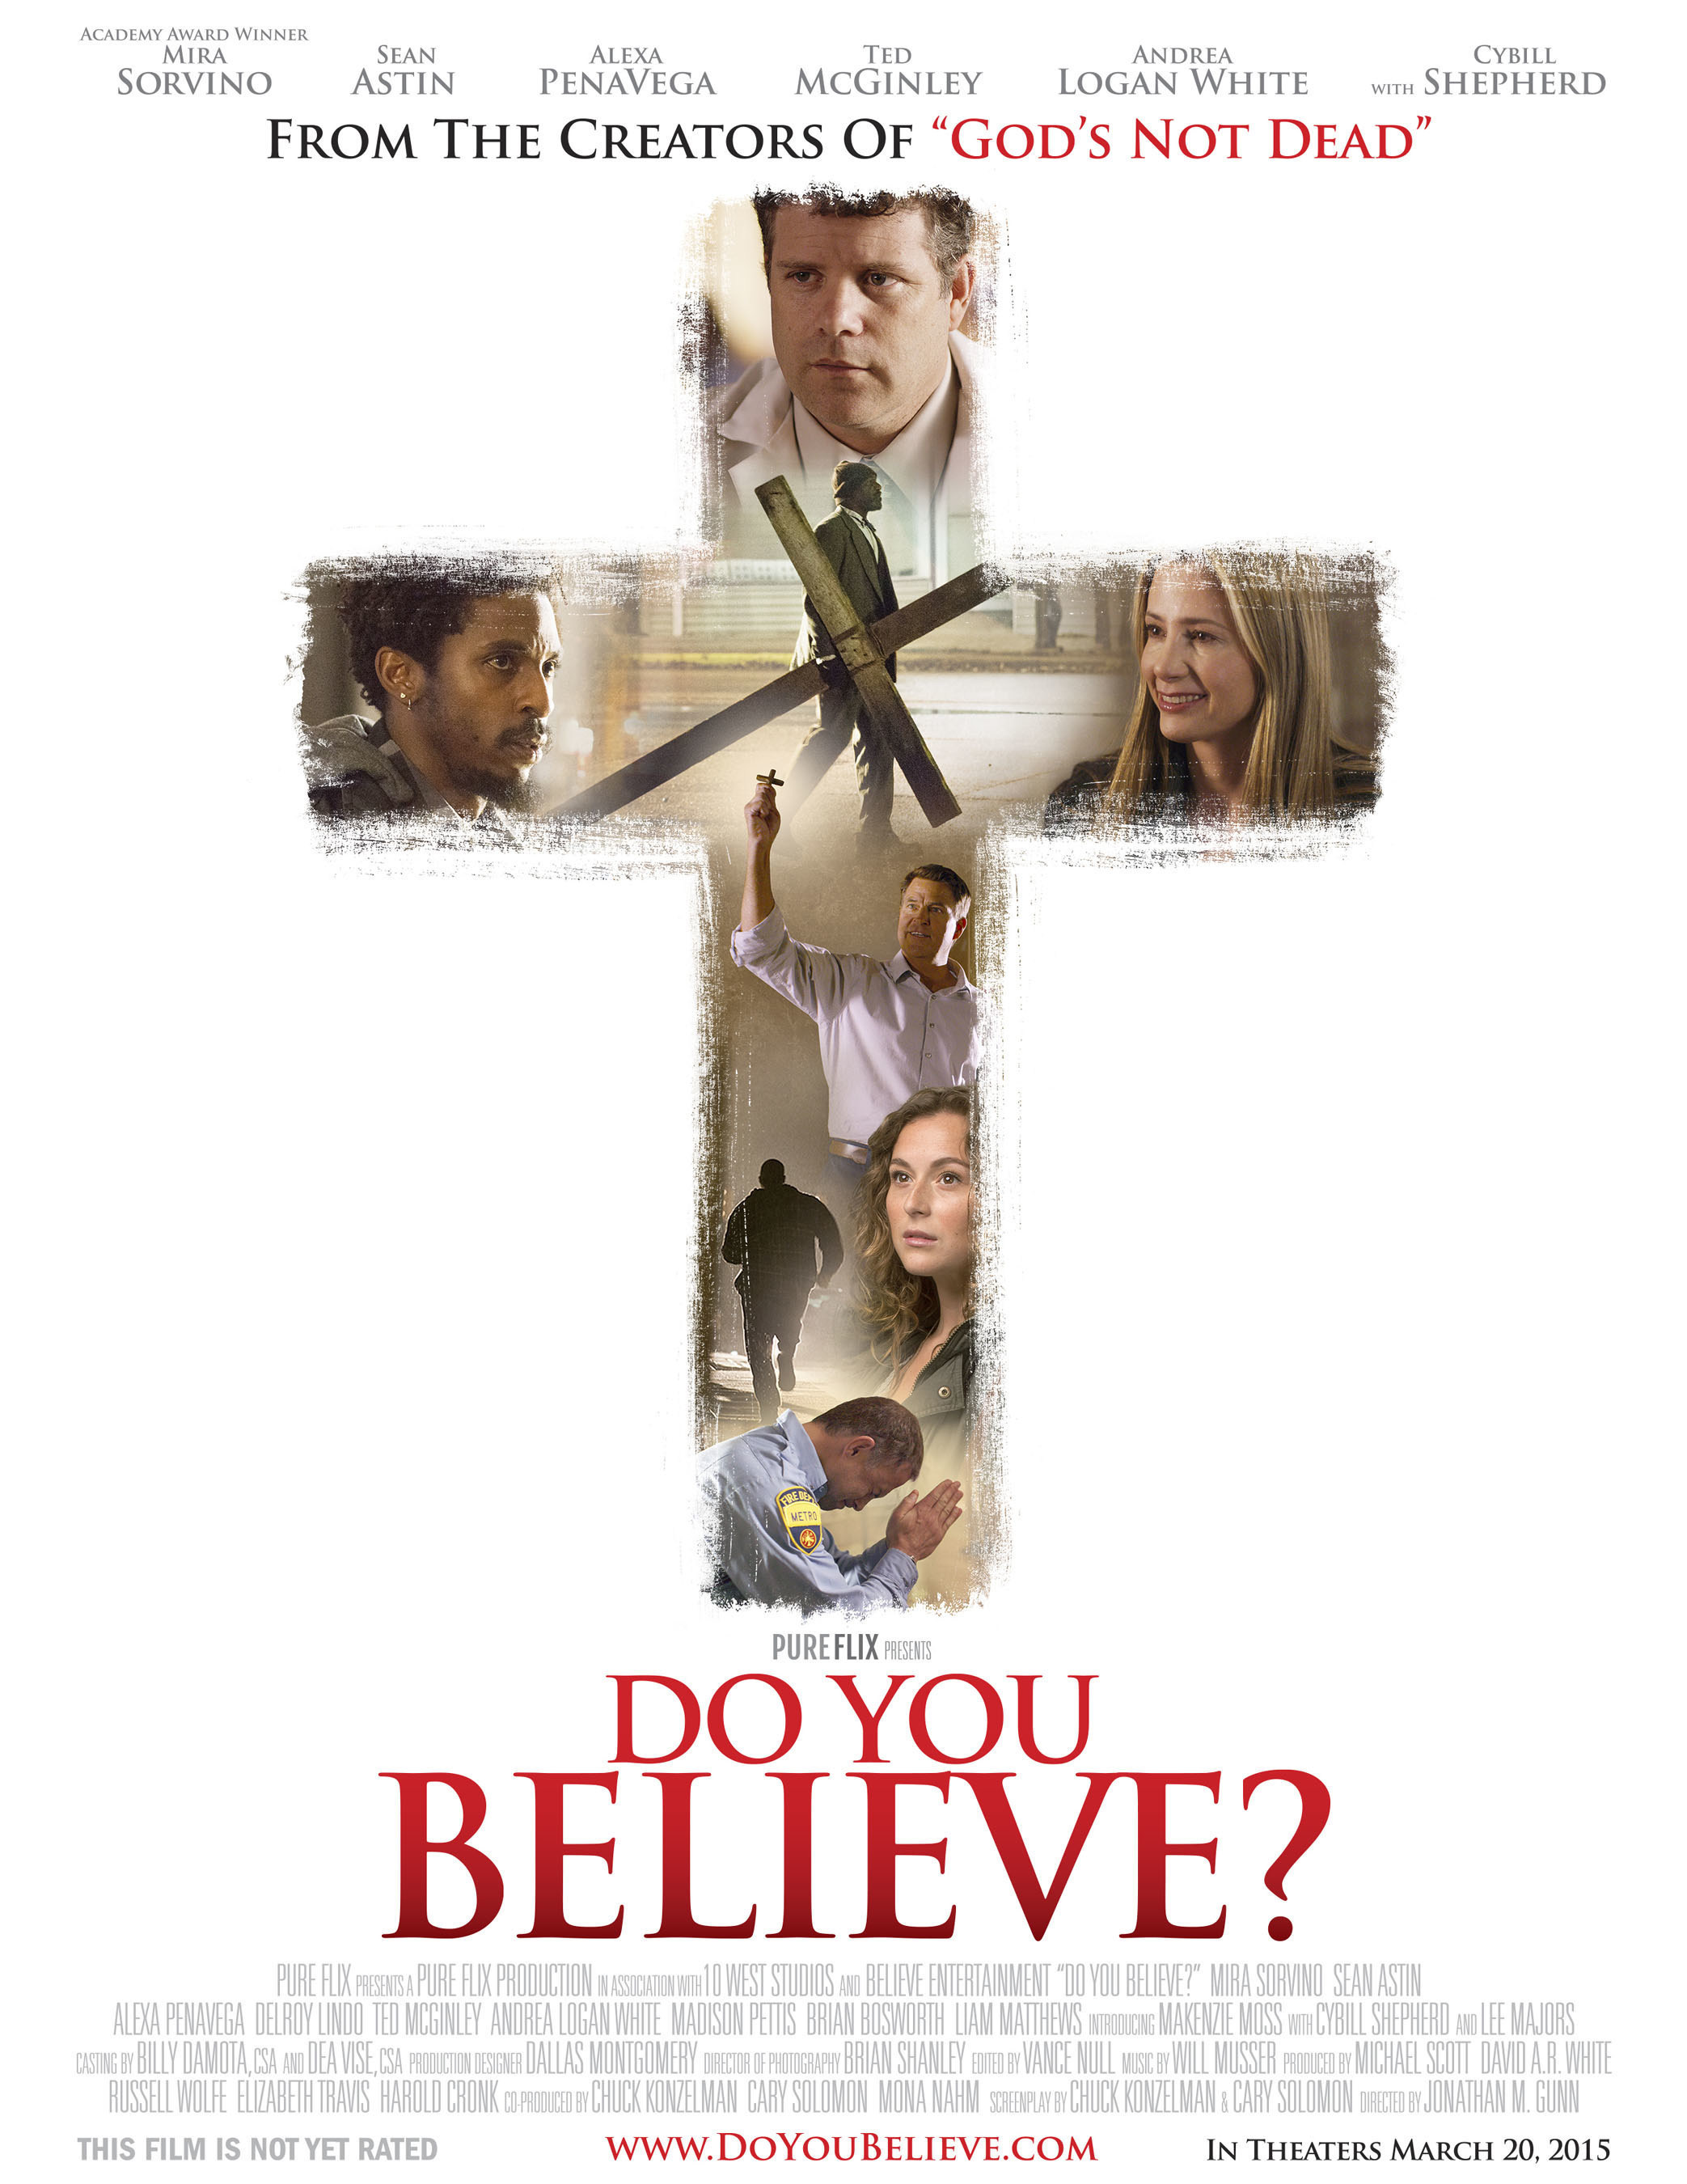 Courtesy of Pure Flix. Official artwork for the film "Do You Believe?" releasing in theaters March 20, 2015.